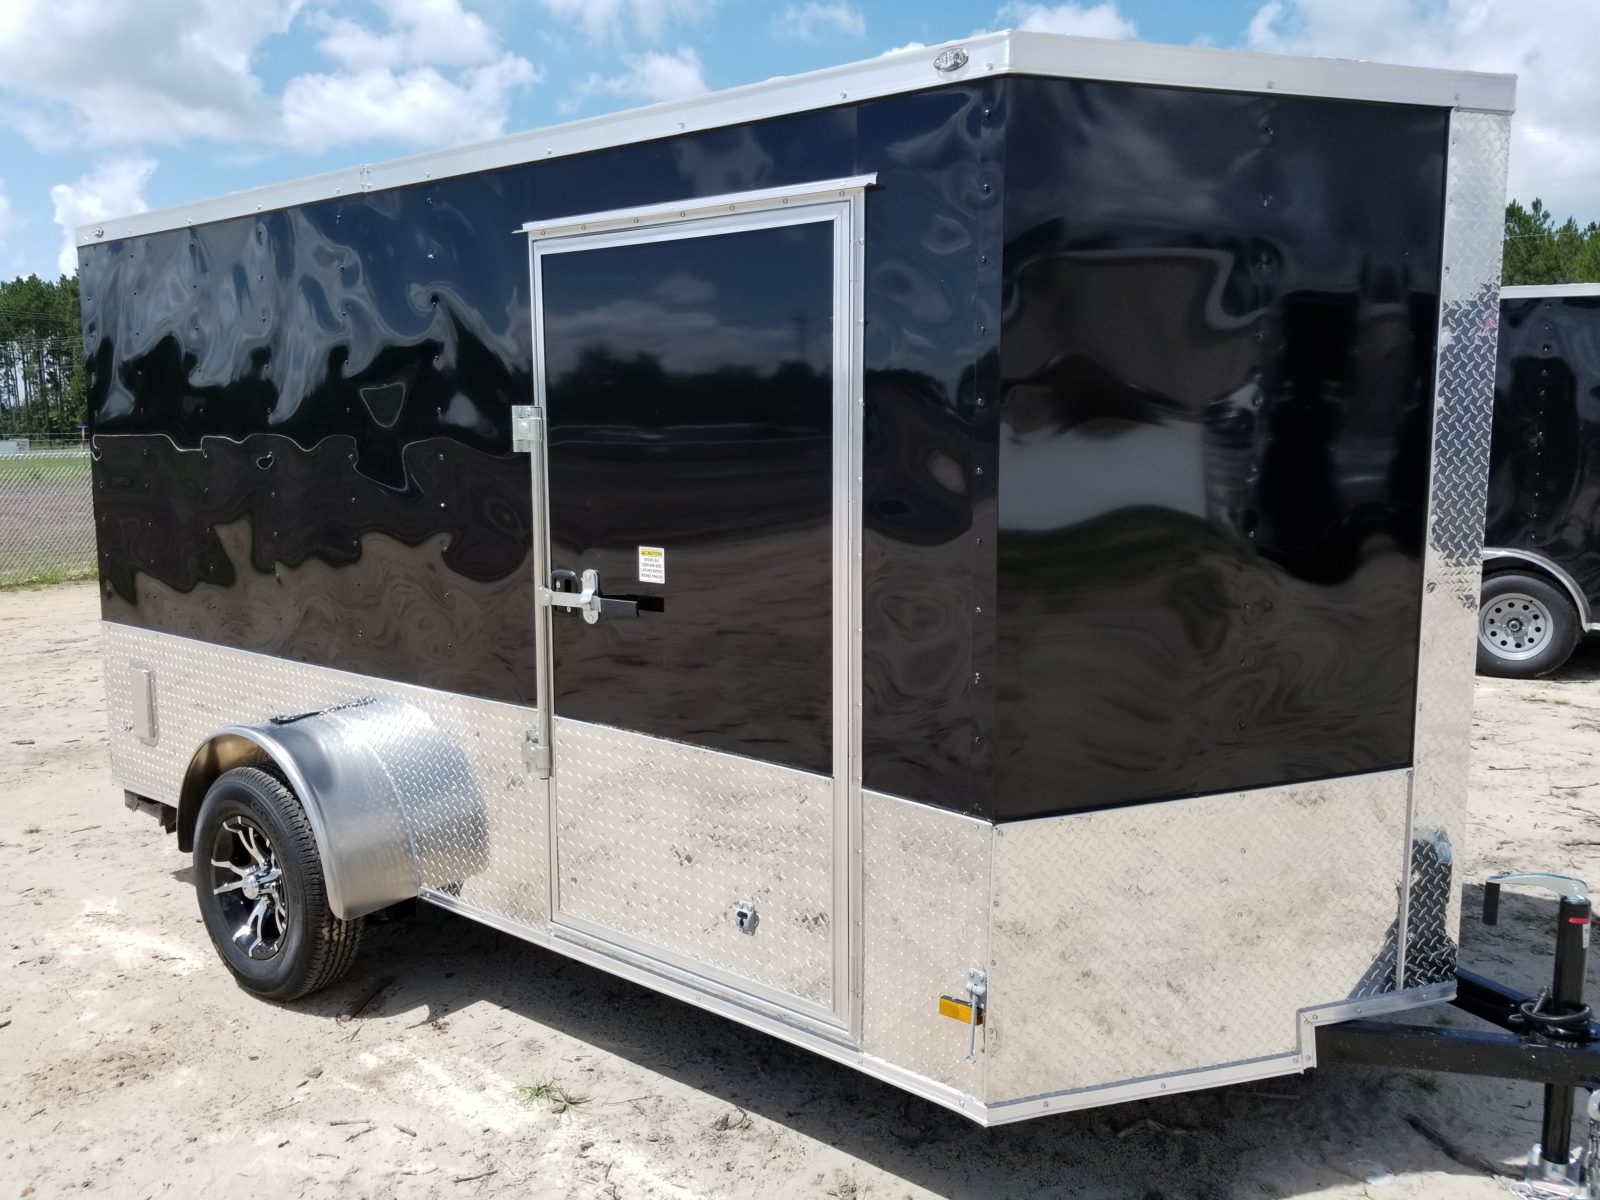 6x12 Enclosed Cargo Trailers For Sale Cheap. Why Buy Used? (ad 610